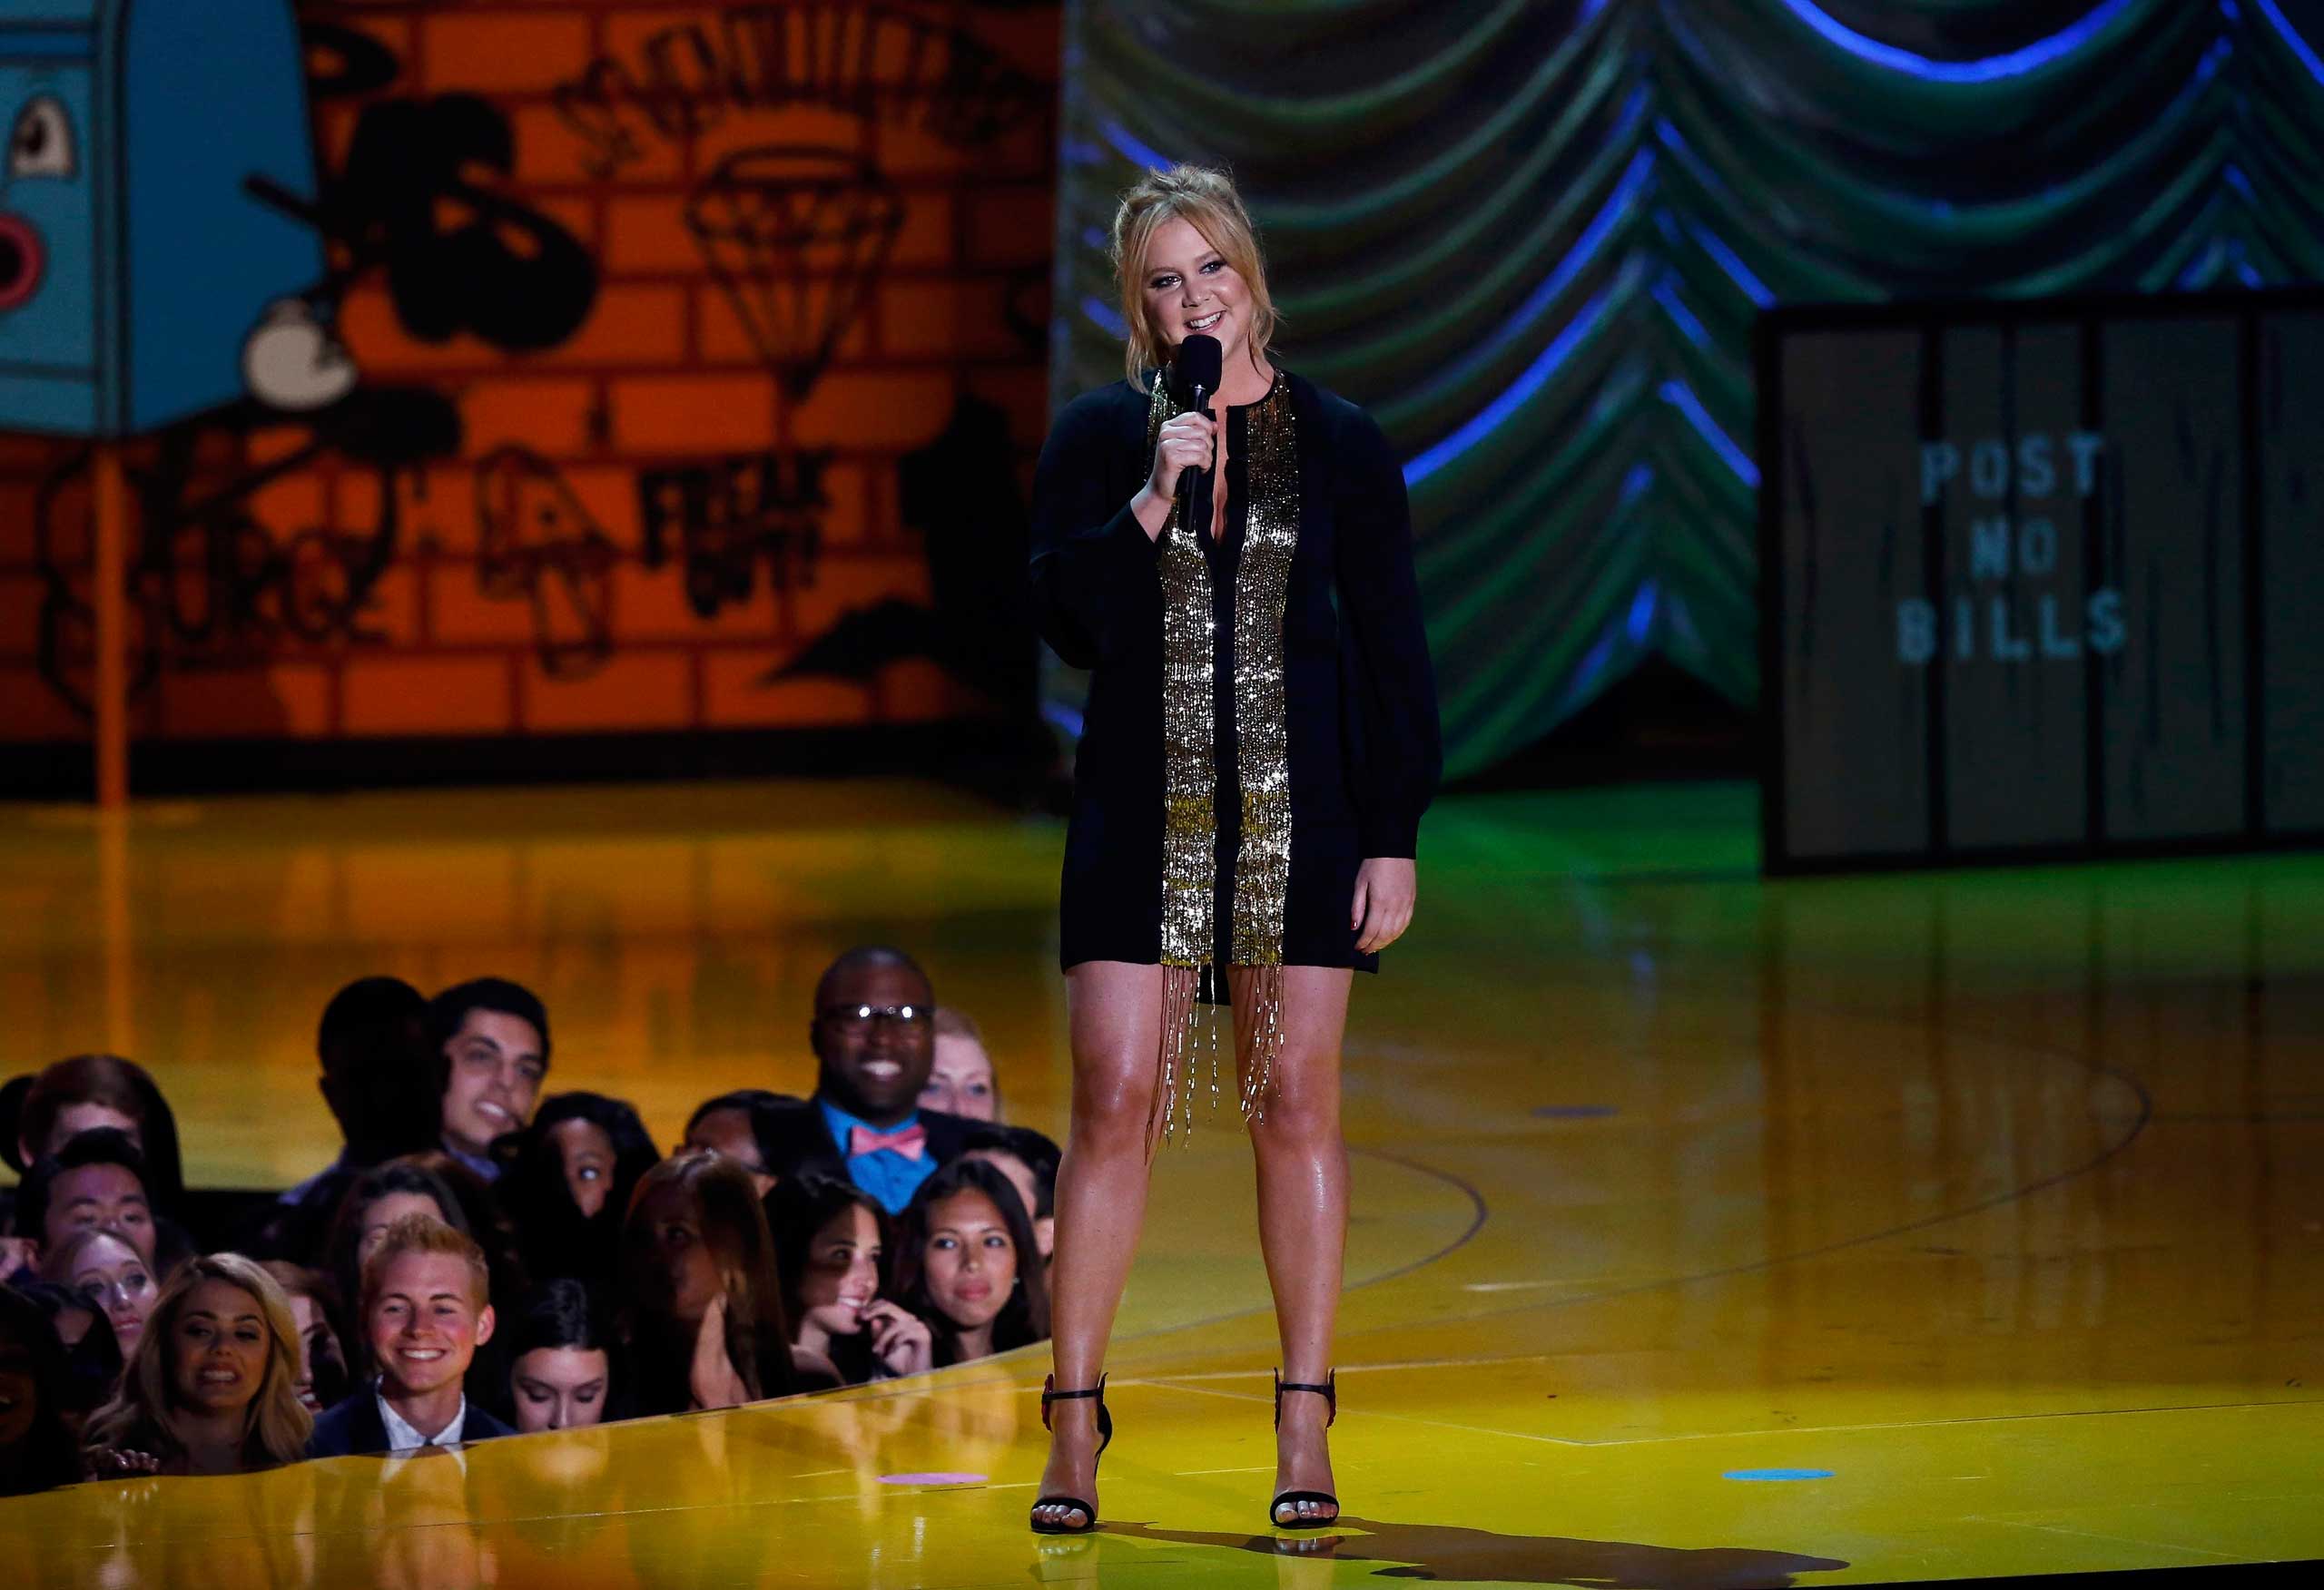 Host Amy Schumer opens the show at the 2015 MTV Movie Awards in Los Angeles on Apr. 12, 2015.